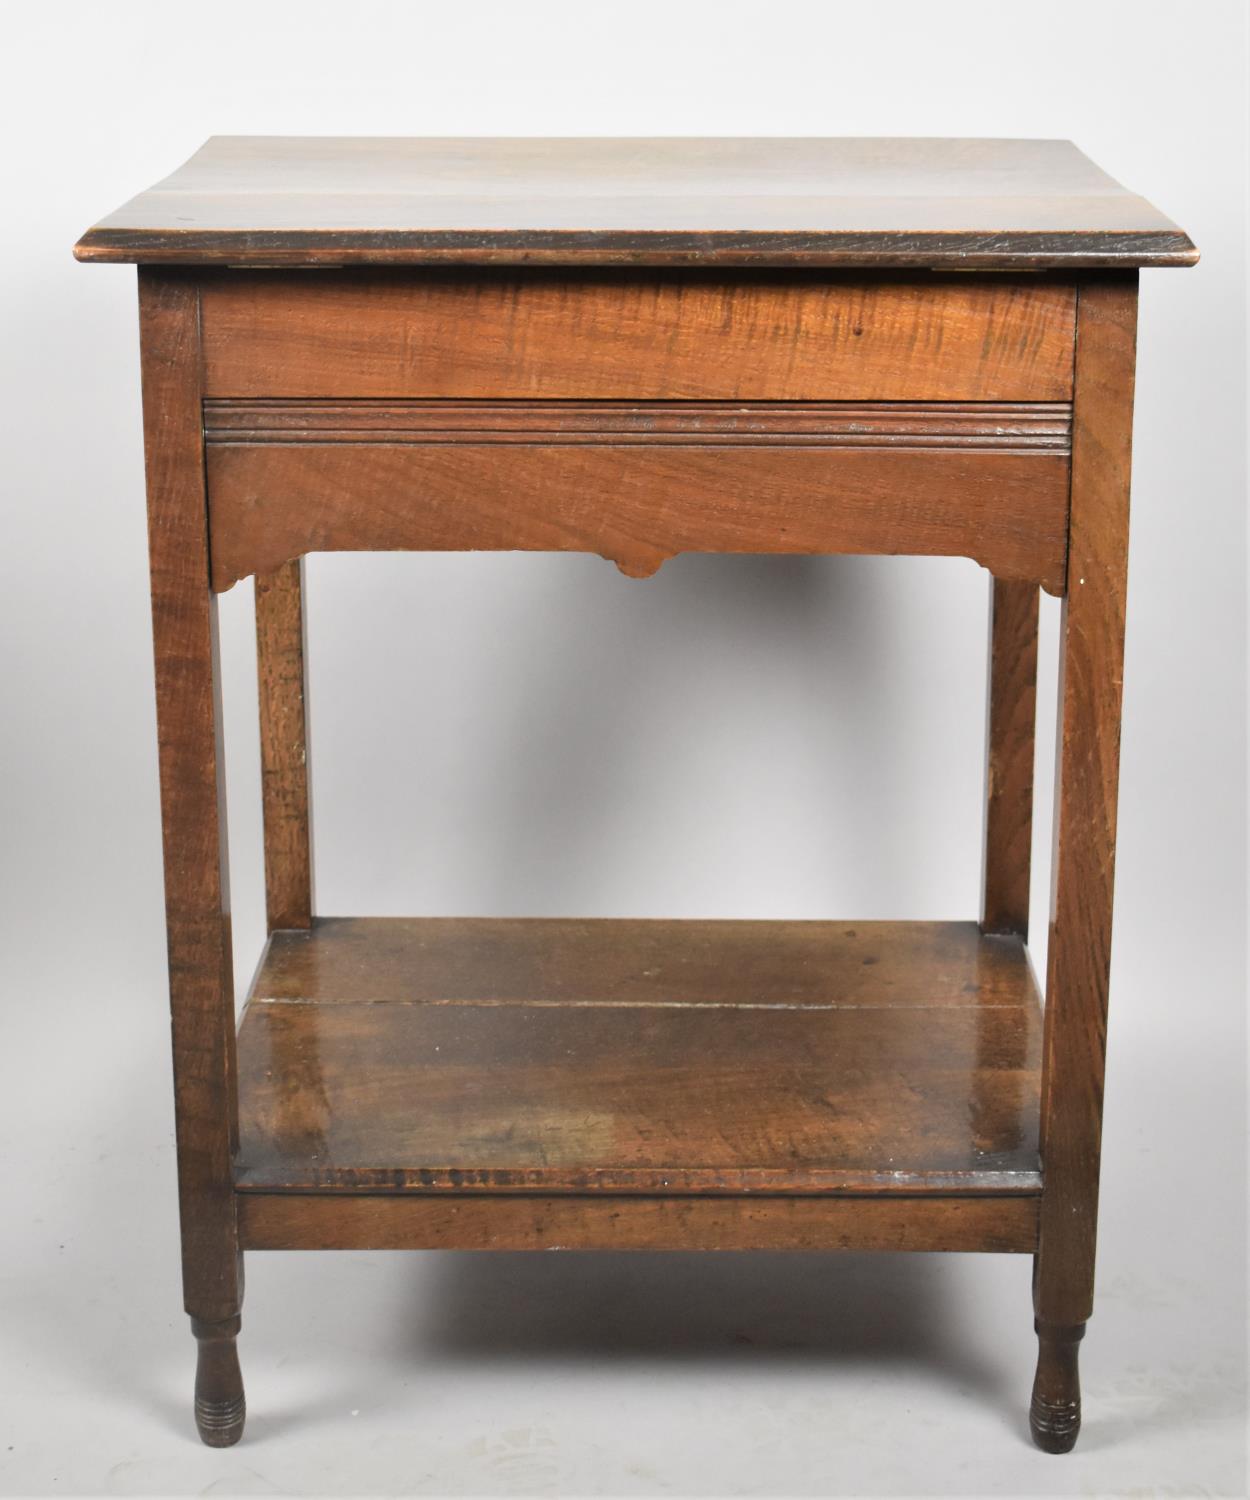 A Late 19th Century Oak Work Table with Hinged Top and Two Plank Stretcher Shelf, 60cm wide